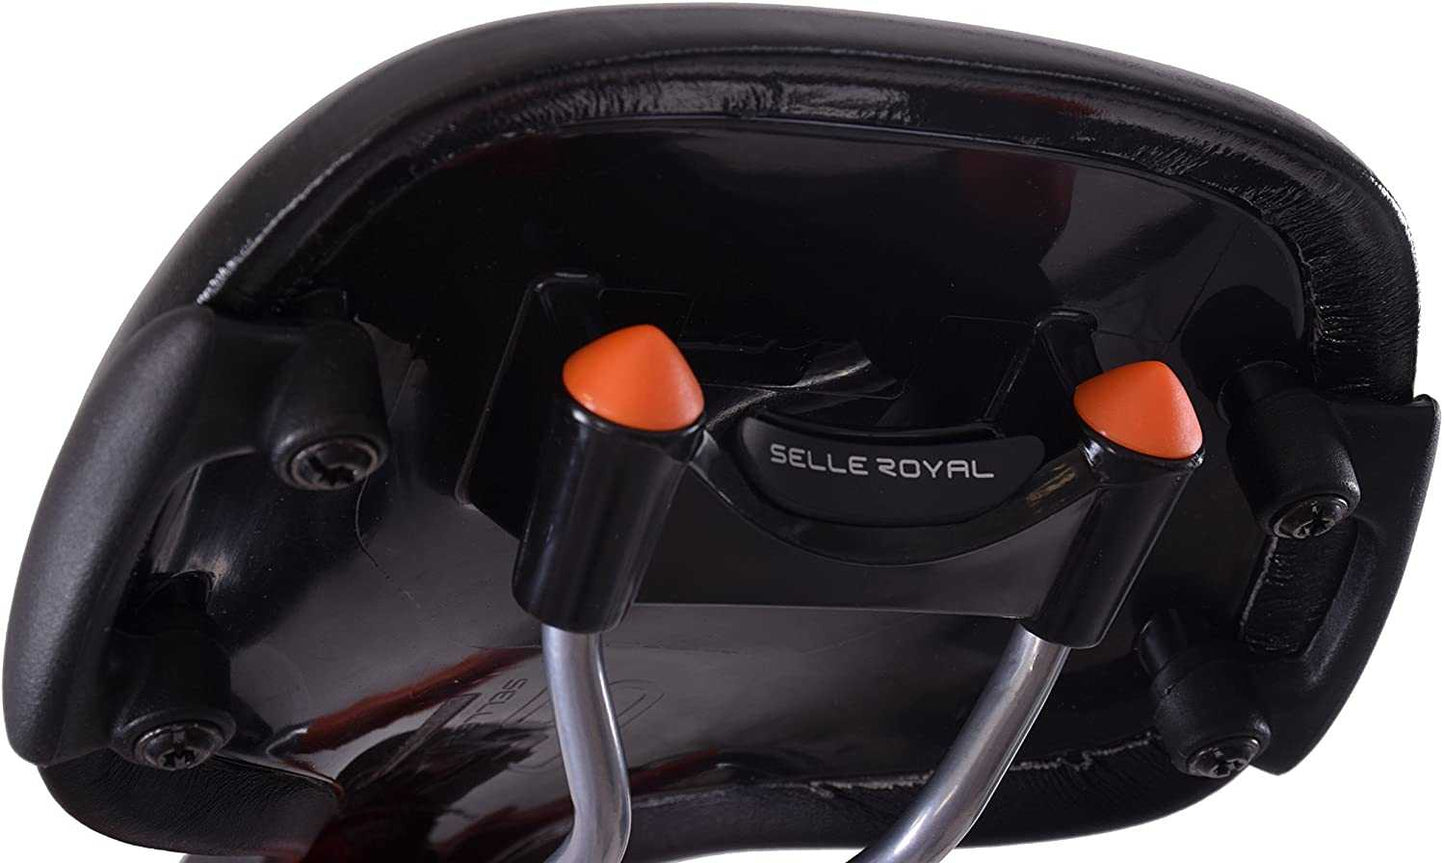 Selle Royal Lookin Moderate/Relaxed Position Saddle